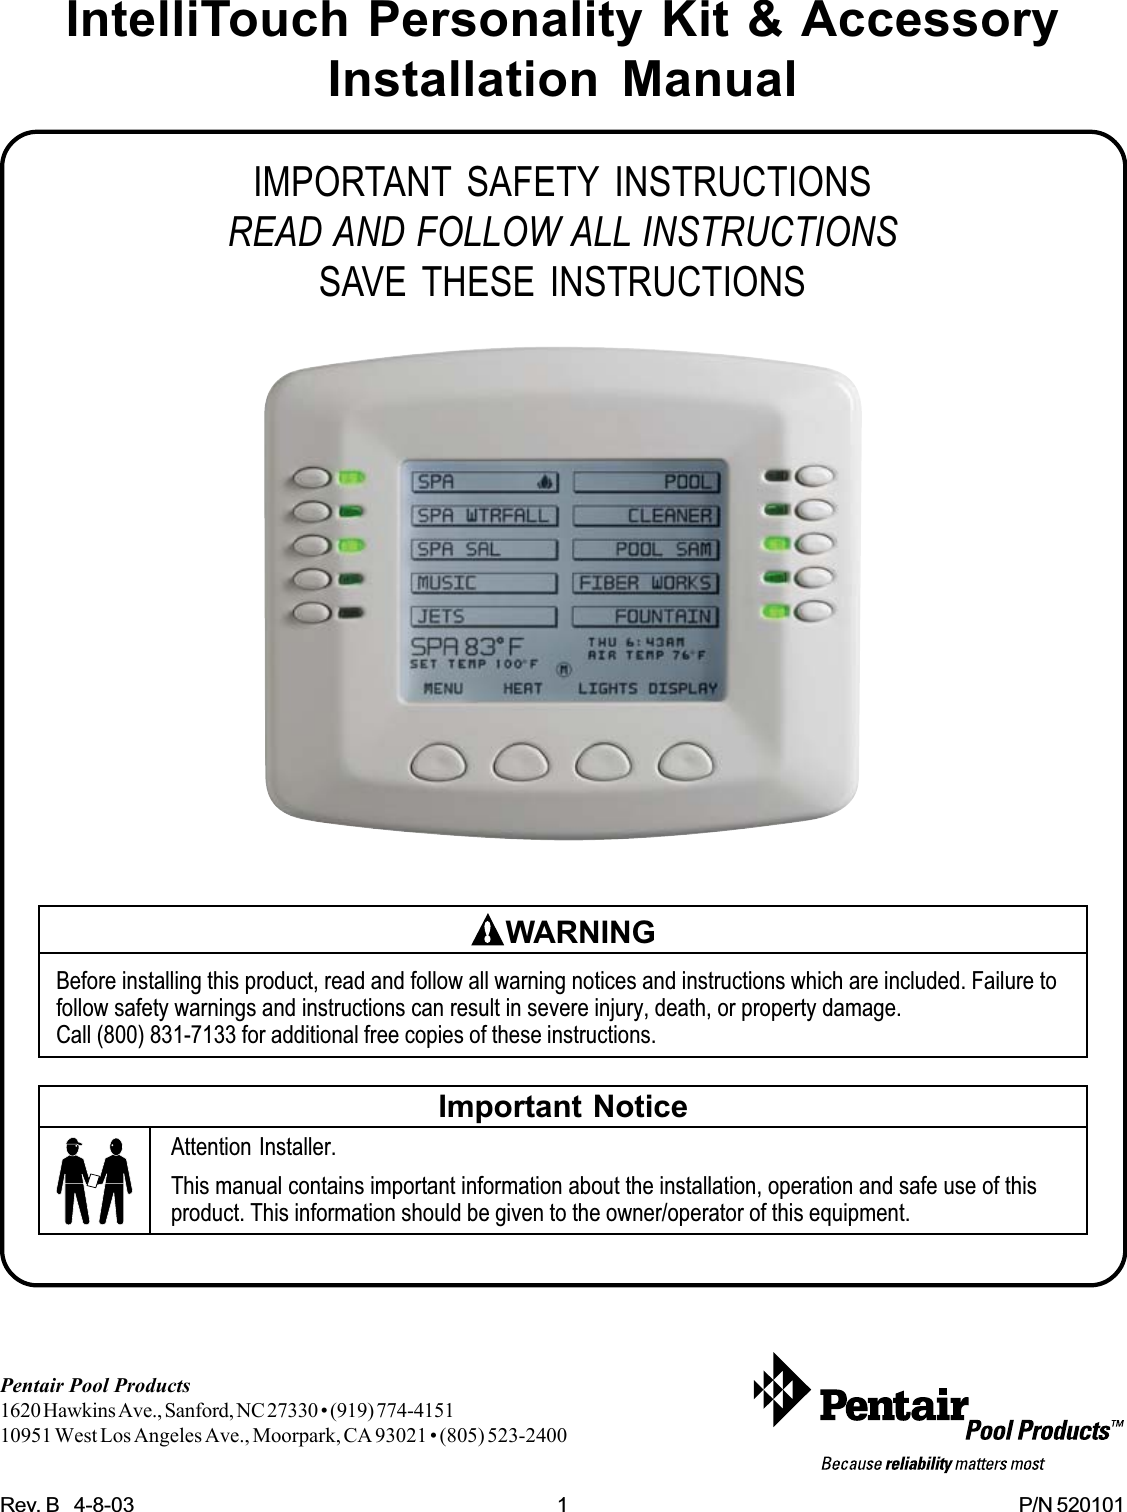 Rev. B   4-8-03 1 P/N 520101IntelliTouch Personality Kit &amp; AccessoryInstallation ManualIMPORTANT SAFETY INSTRUCTIONSREAD AND FOLLOW ALL INSTRUCTIONSSAVE THESE INSTRUCTIONSPentair Pool Products1620 Hawkins Ave., Sanford, NC 27330 • (919) 774-415110951 West Los Angeles Ave., Moorpark, CA 93021 • (805) 523-2400Important NoticeAttention Installer.This manual contains important information about the installation, operation and safe use of thisproduct. This information should be given to the owner/operator of this equipment.Before installing this product, read and follow all warning notices and instructions which are included. Failure tofollow safety warnings and instructions can result in severe injury, death, or property damage.Call (800) 831-7133 for additional free copies of these instructions.WARNING